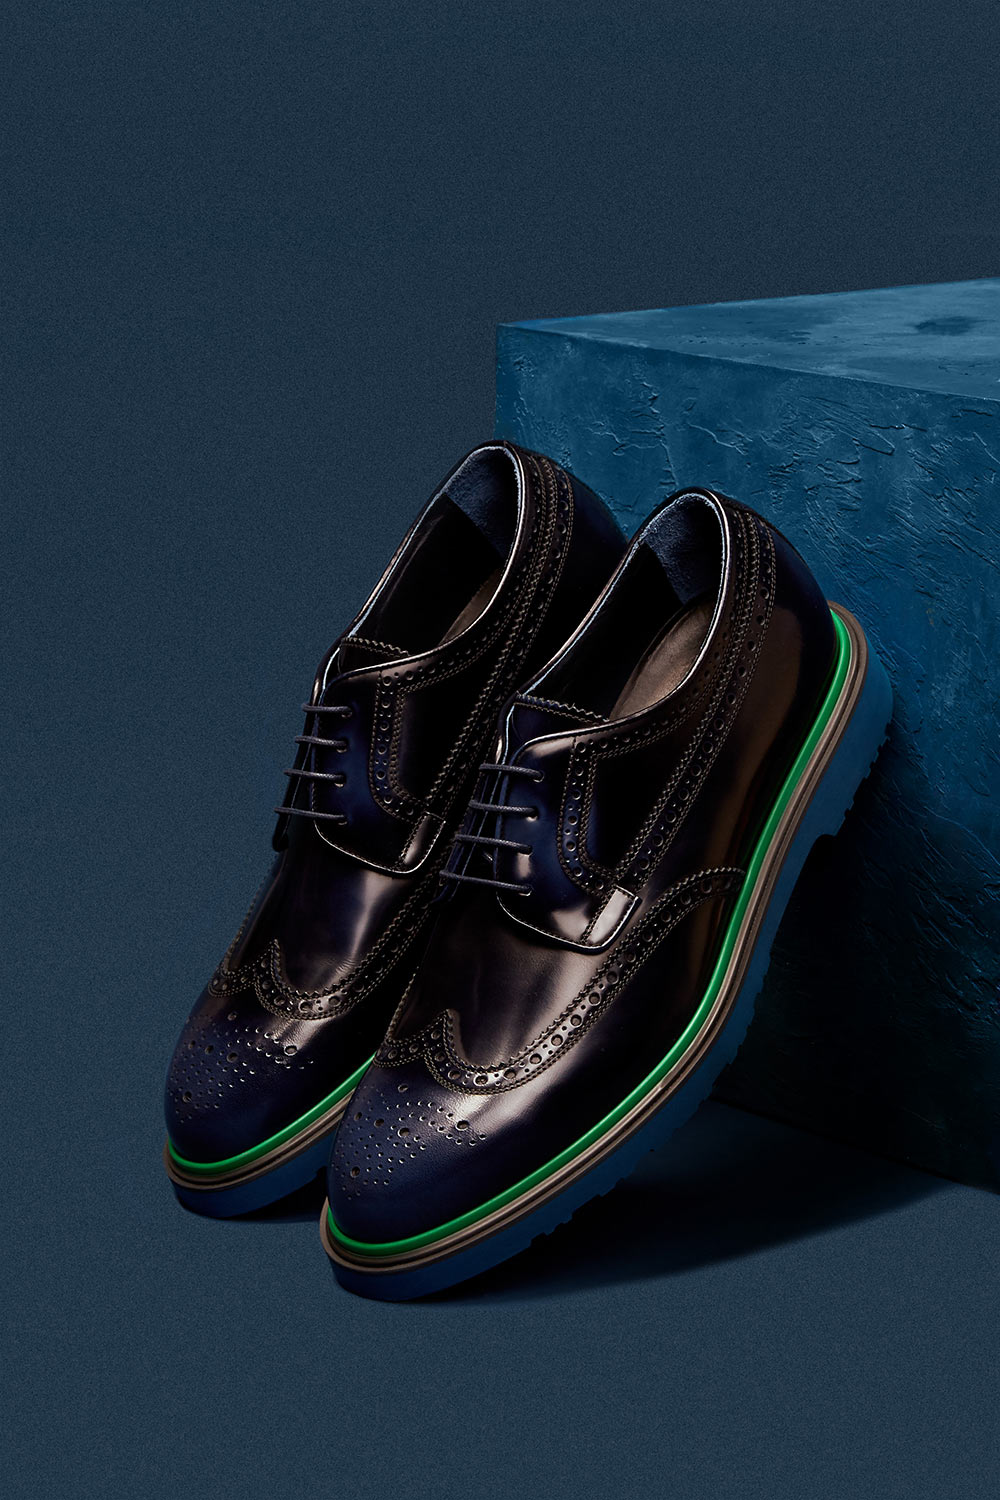 Buy > black paul smith shoes > in stock